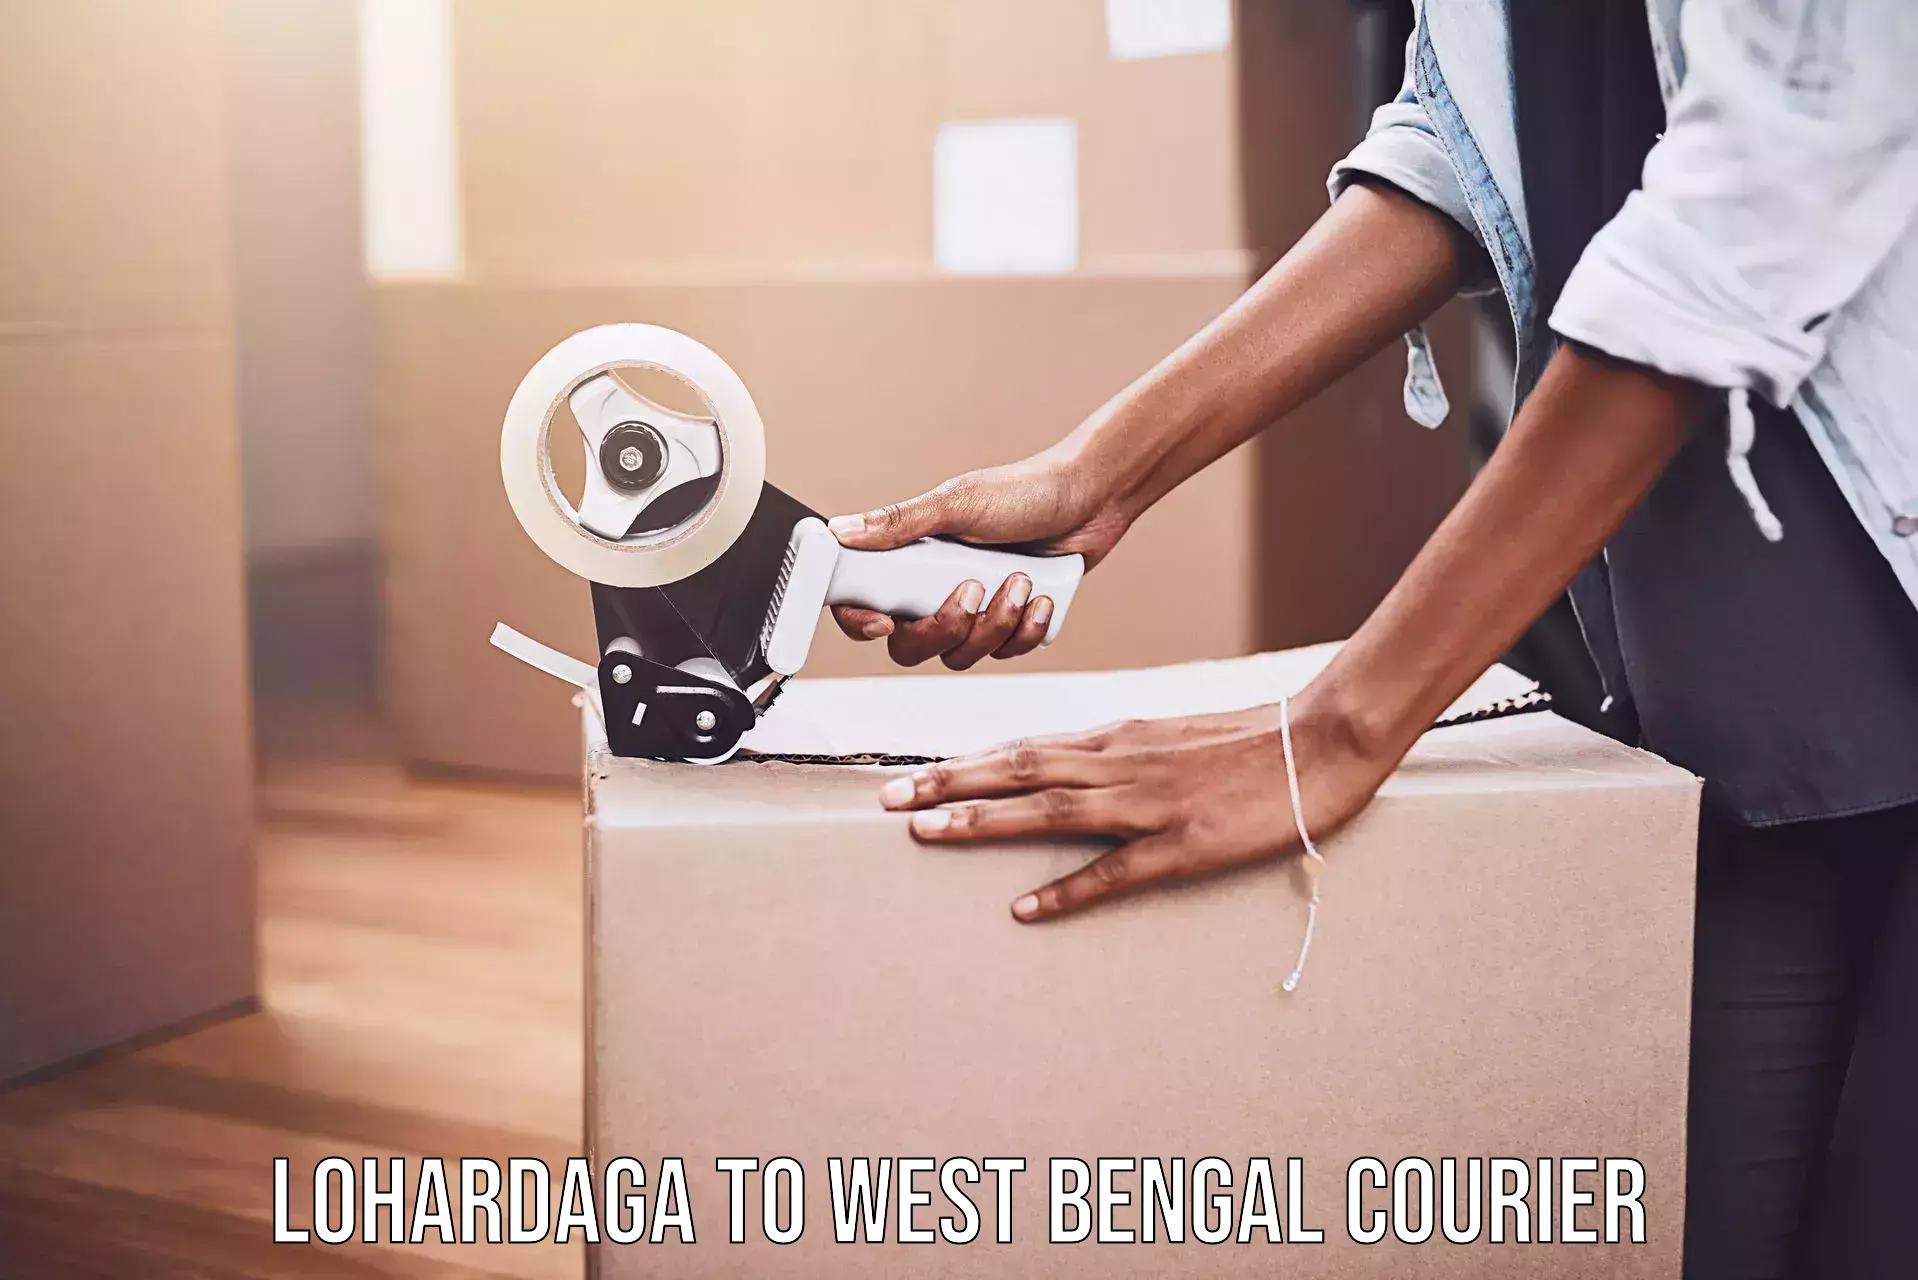 Global courier networks Lohardaga to West Bengal